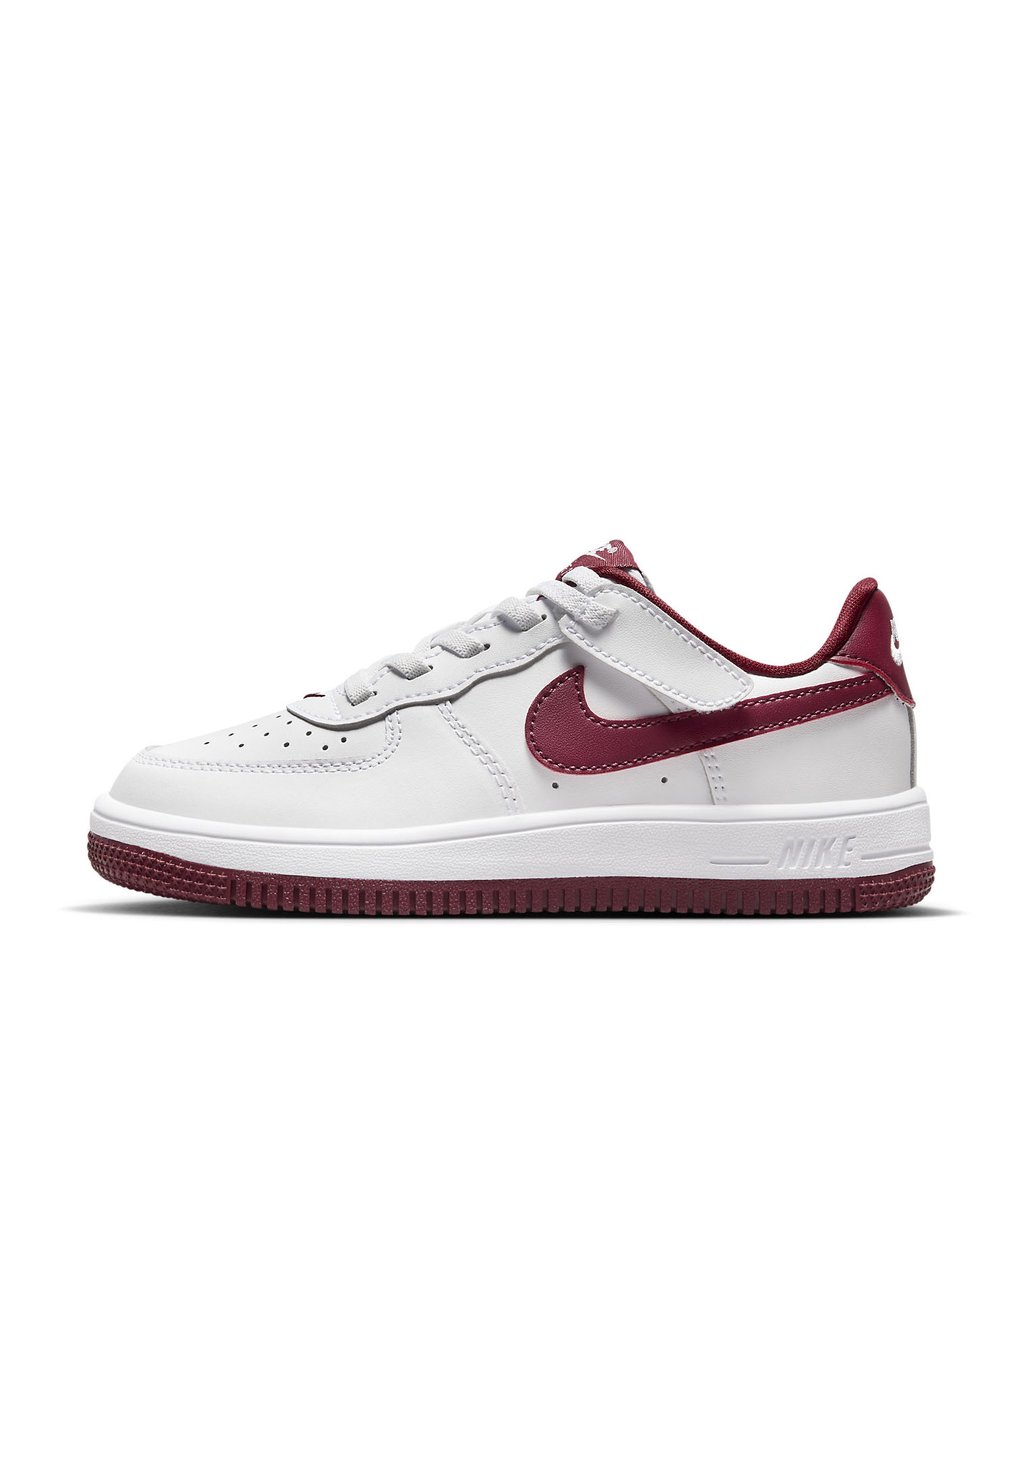 Низкие кроссовки Force 1 Easyon Unisex Nike, цвет white picante red-team red